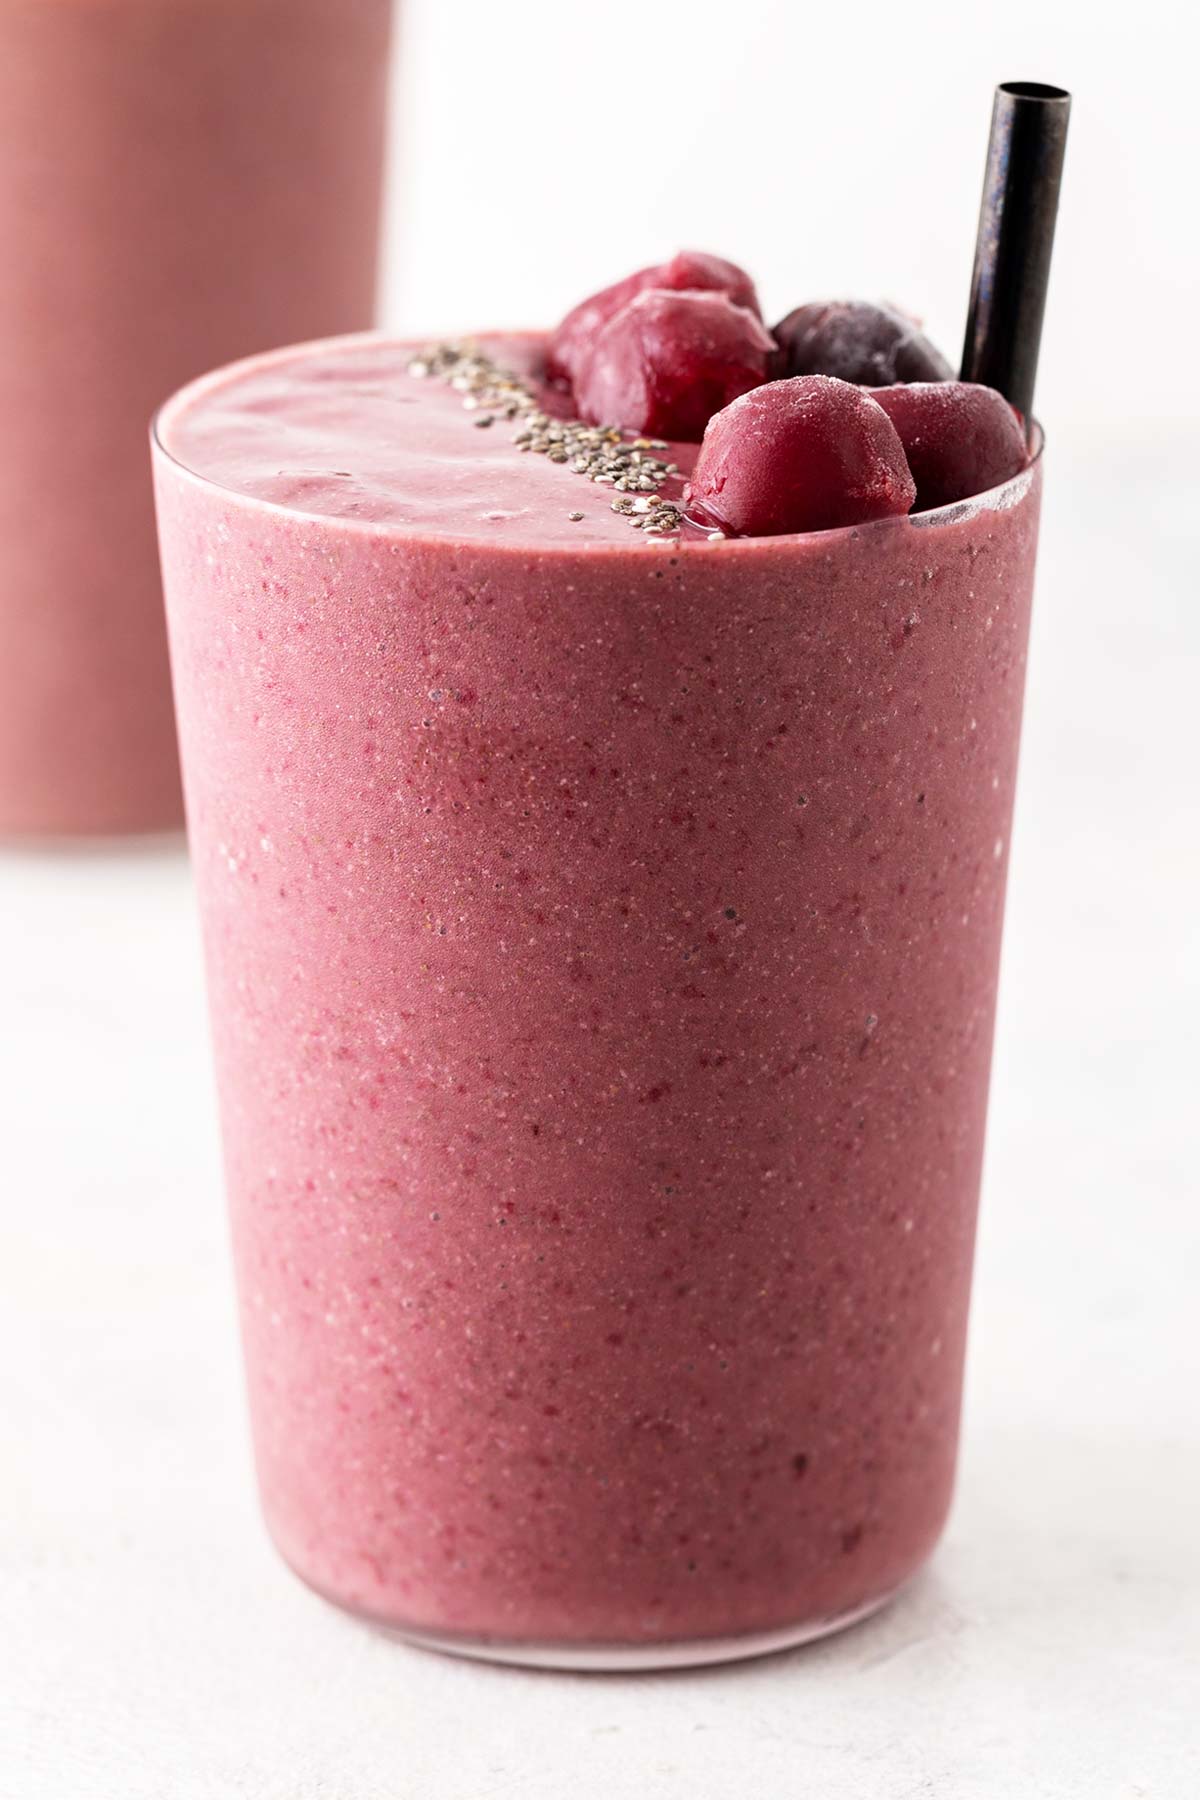 Cherry smoothie in a glass.